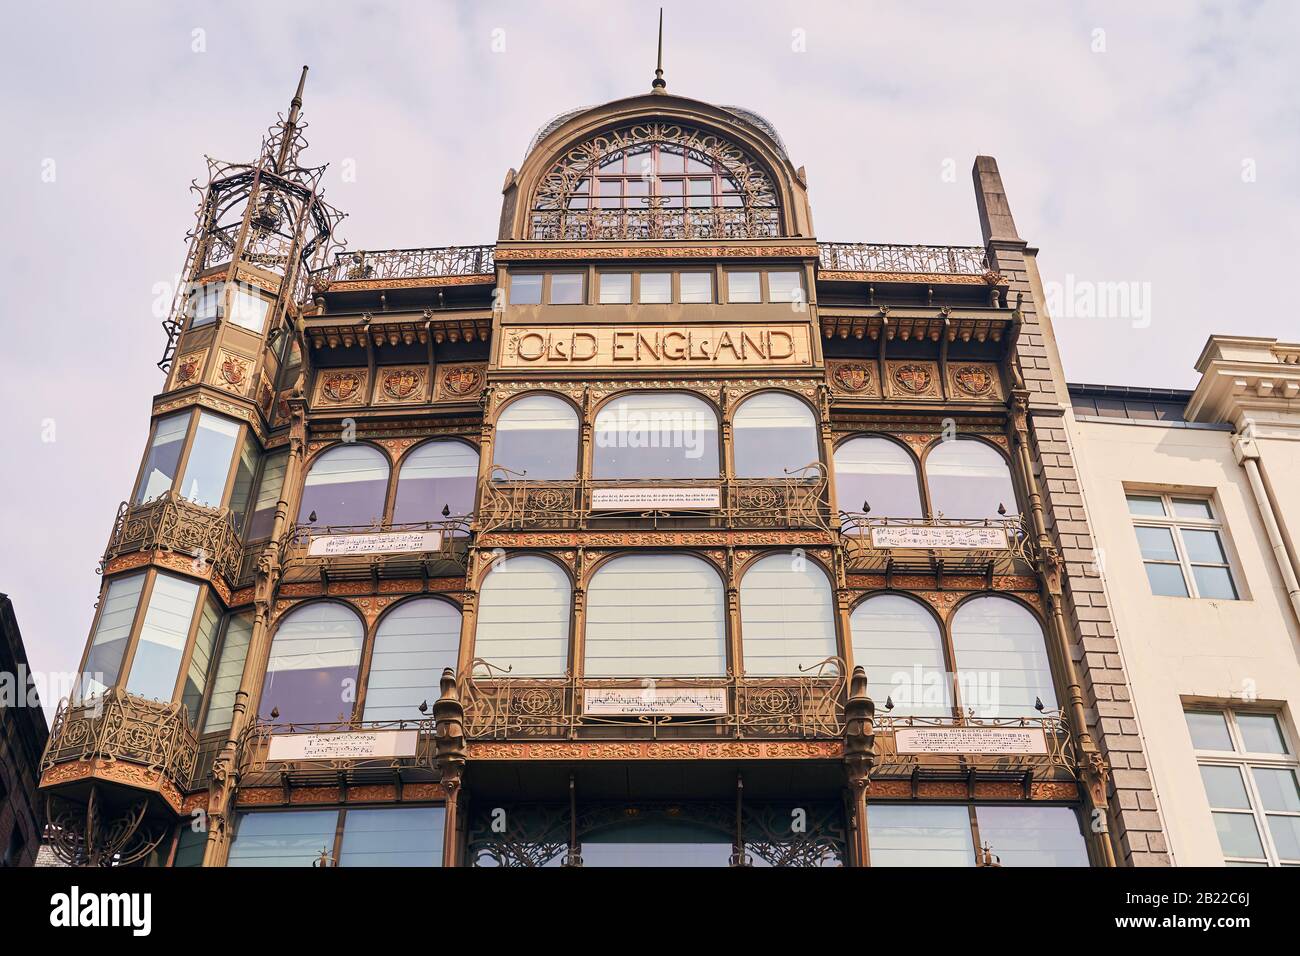 Brussels, Belgium - April 02, 2019: The Musical Instrument Museum, located in the former Old England department store on the Coudenberg street. Stock Photo